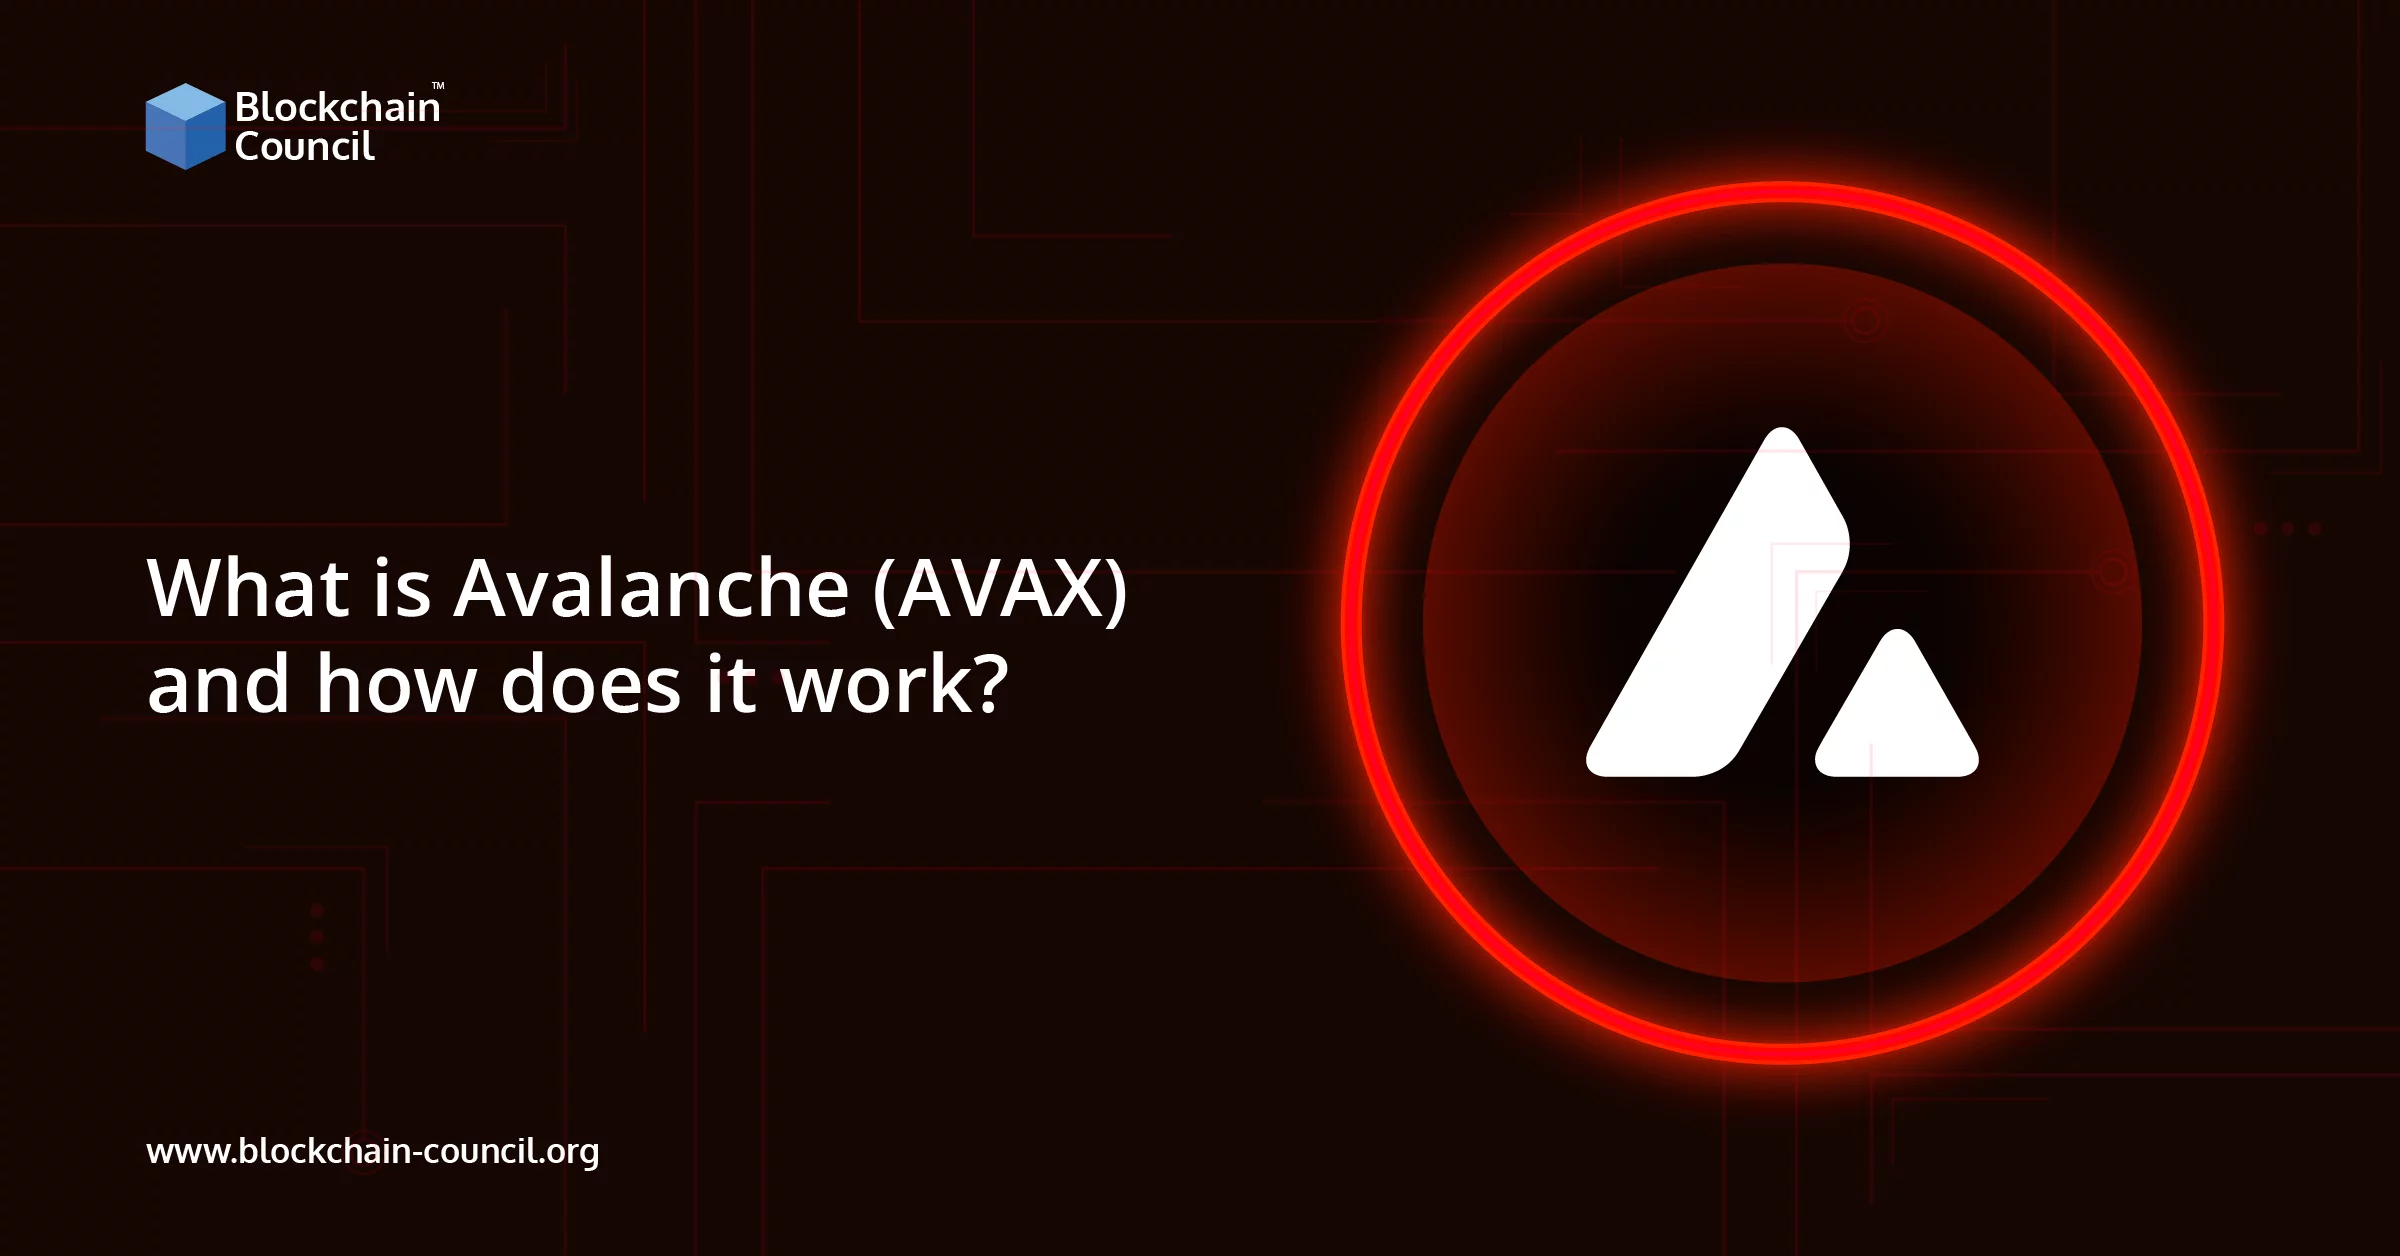 What is Avalanche (AVAX), and how does it work?